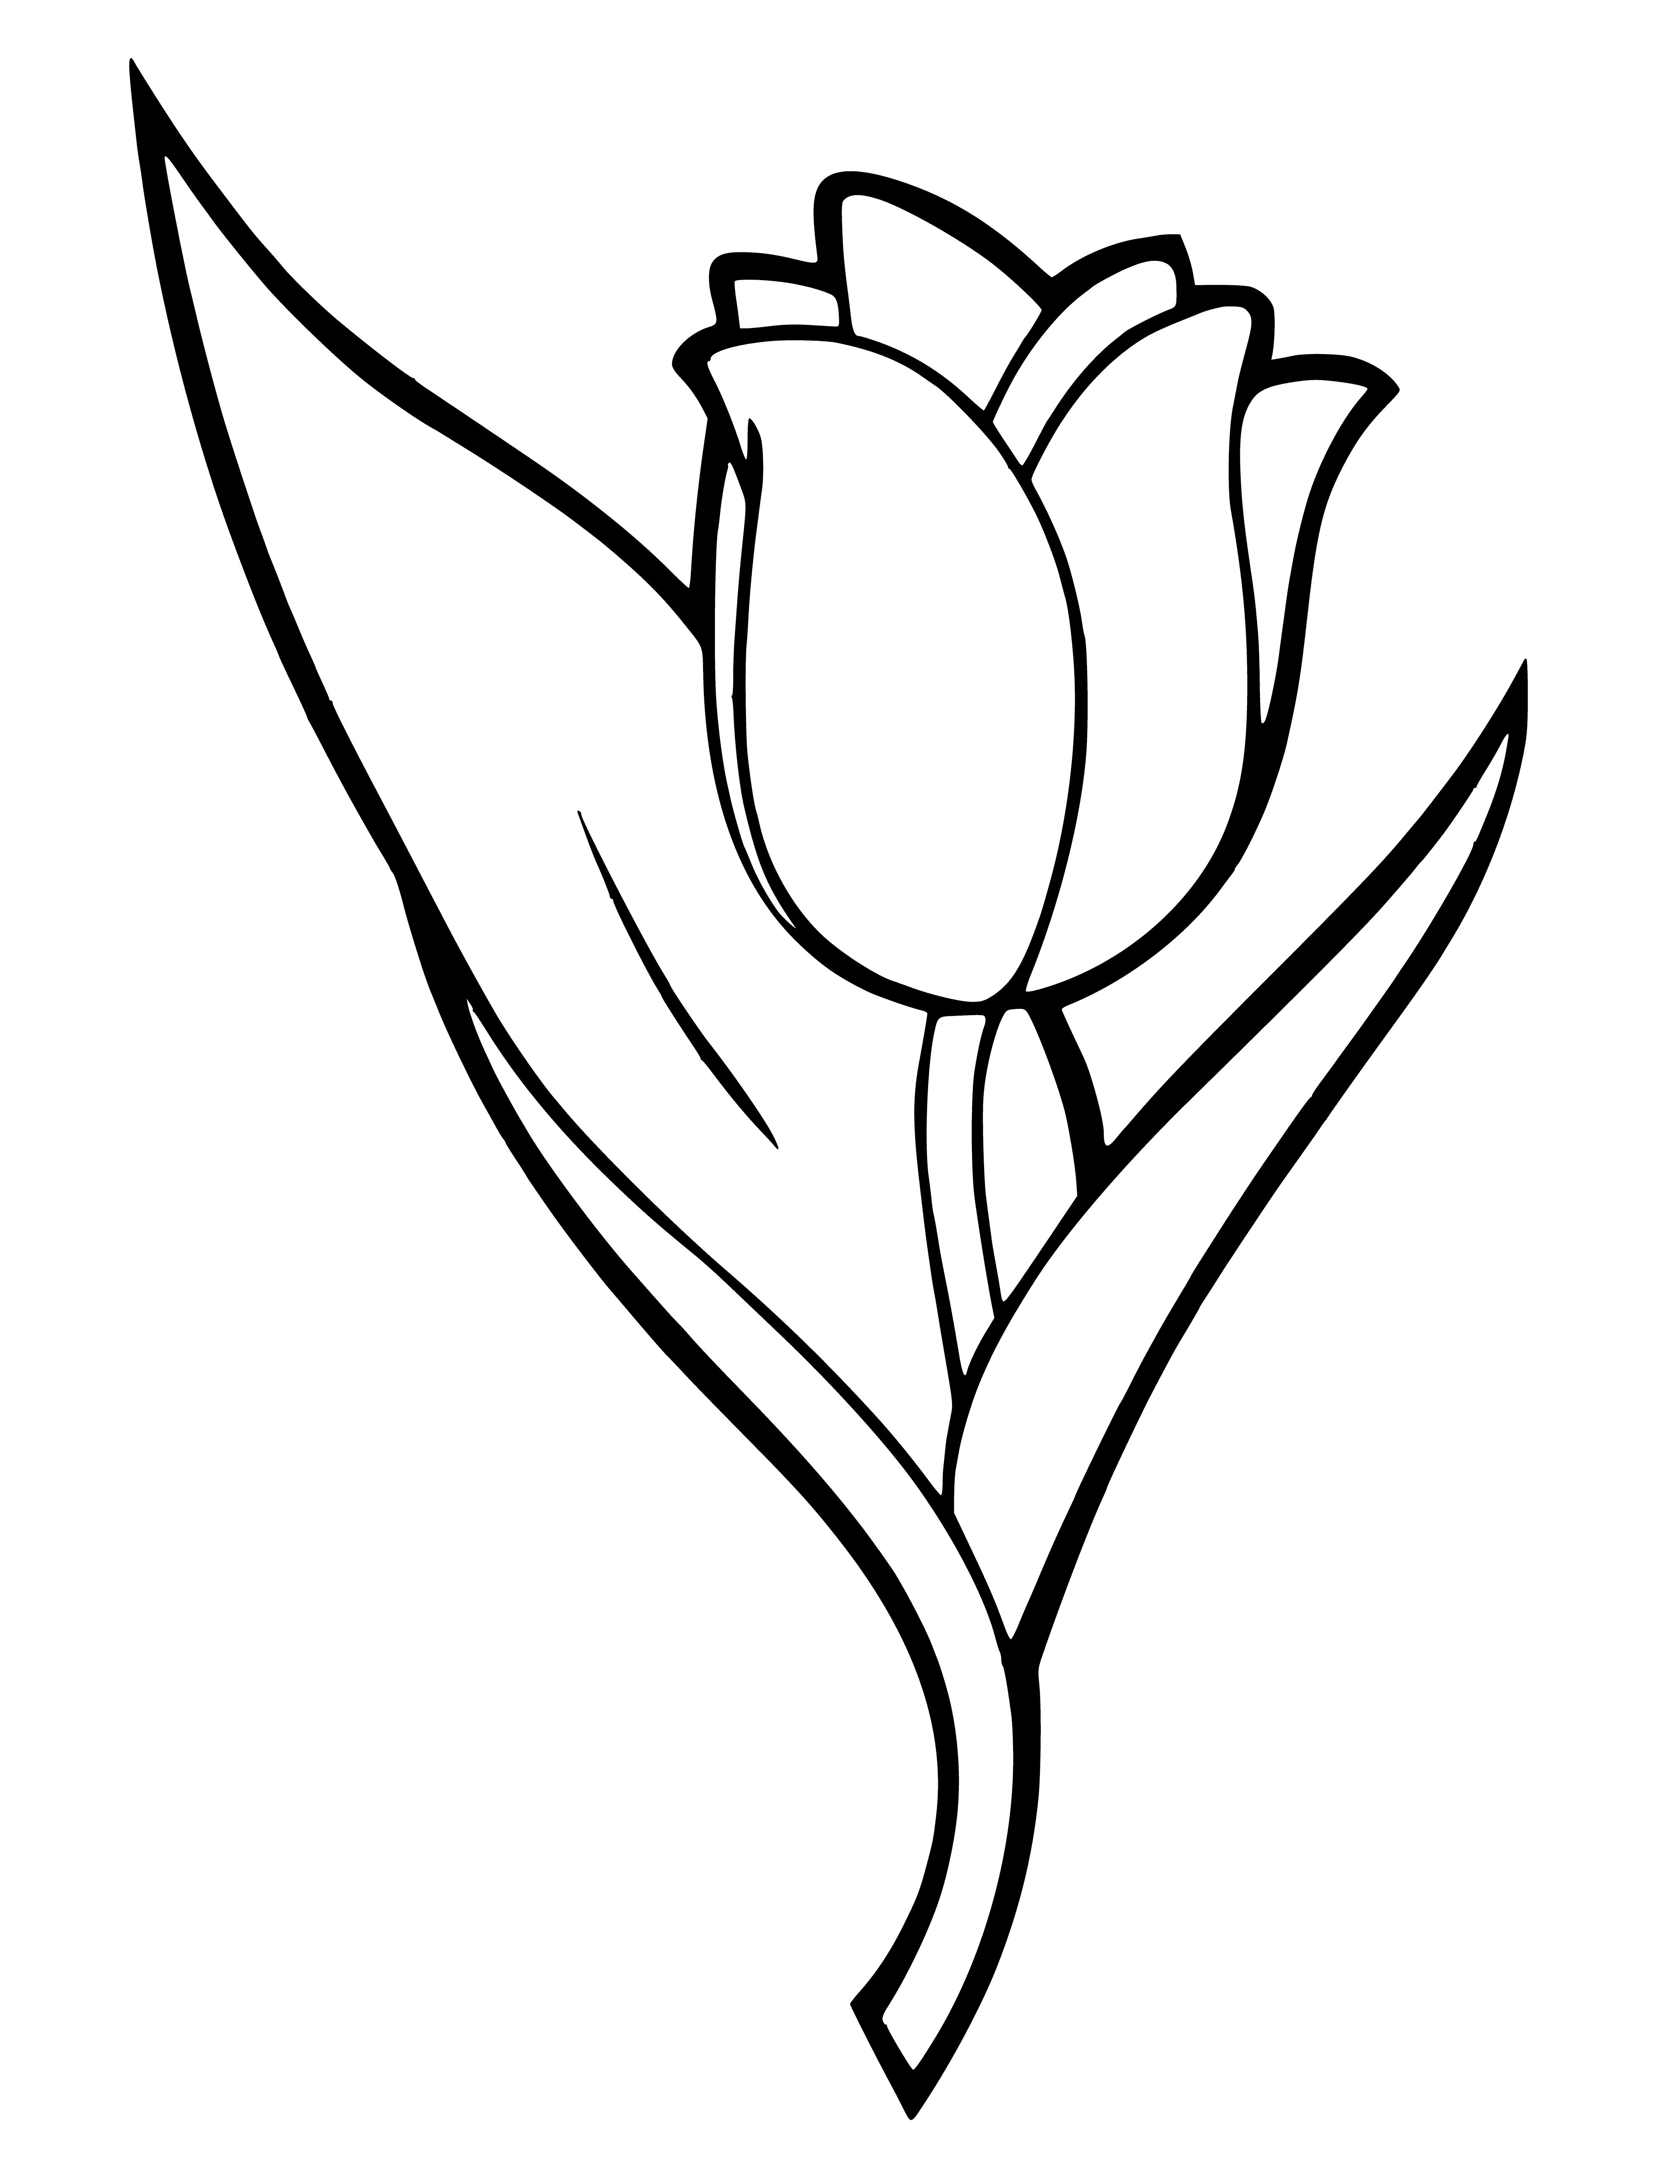 coloring page: Two yellow tulips in a pot with green leaves to color - a perfect spring activity!